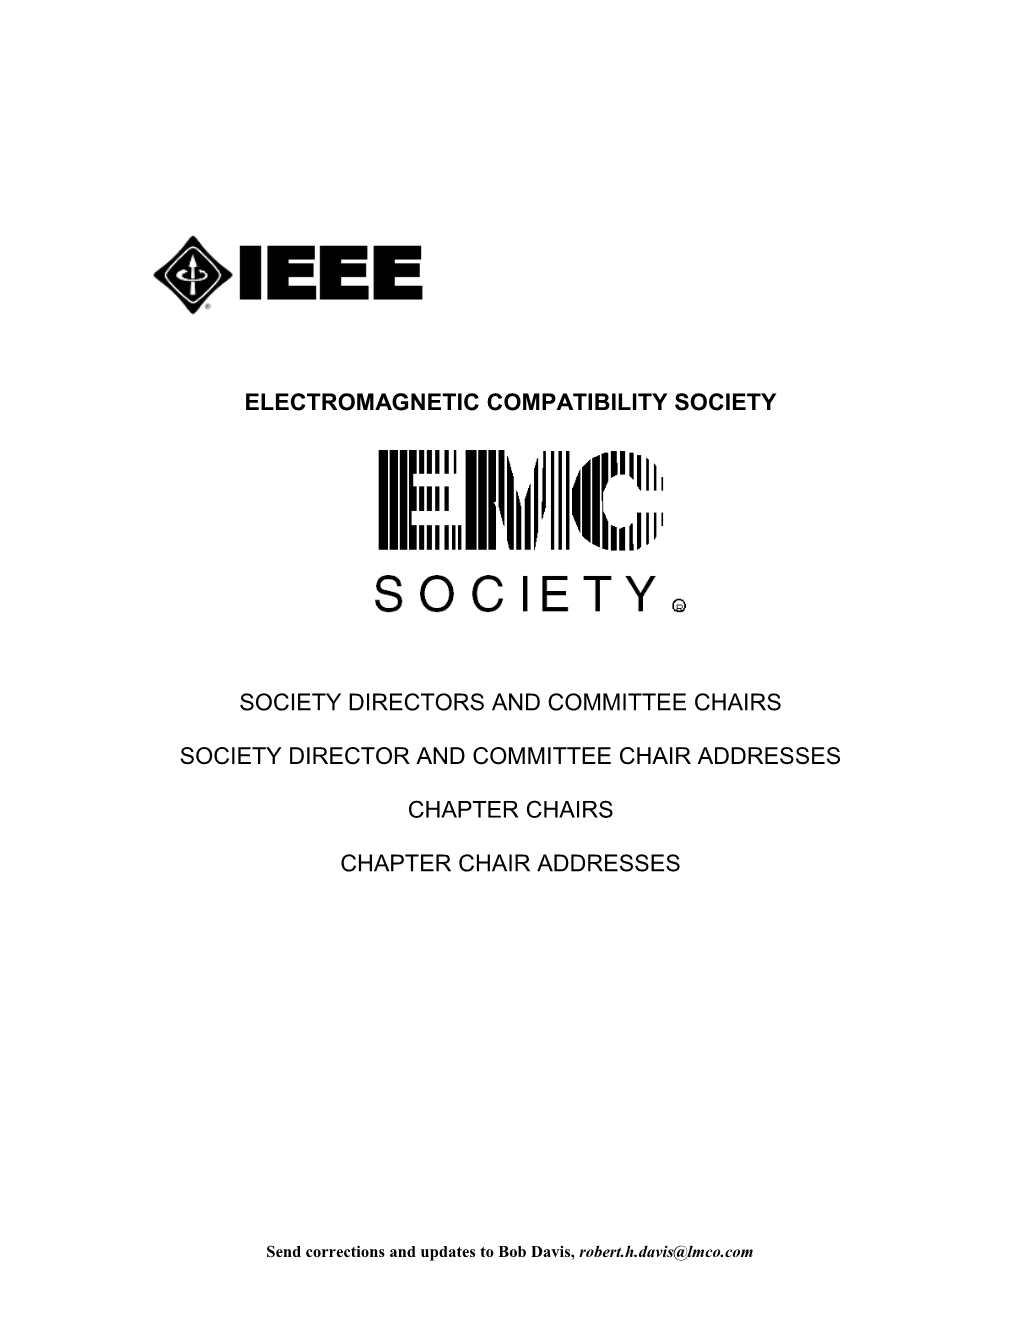 Electromagnetic Compatibility Society